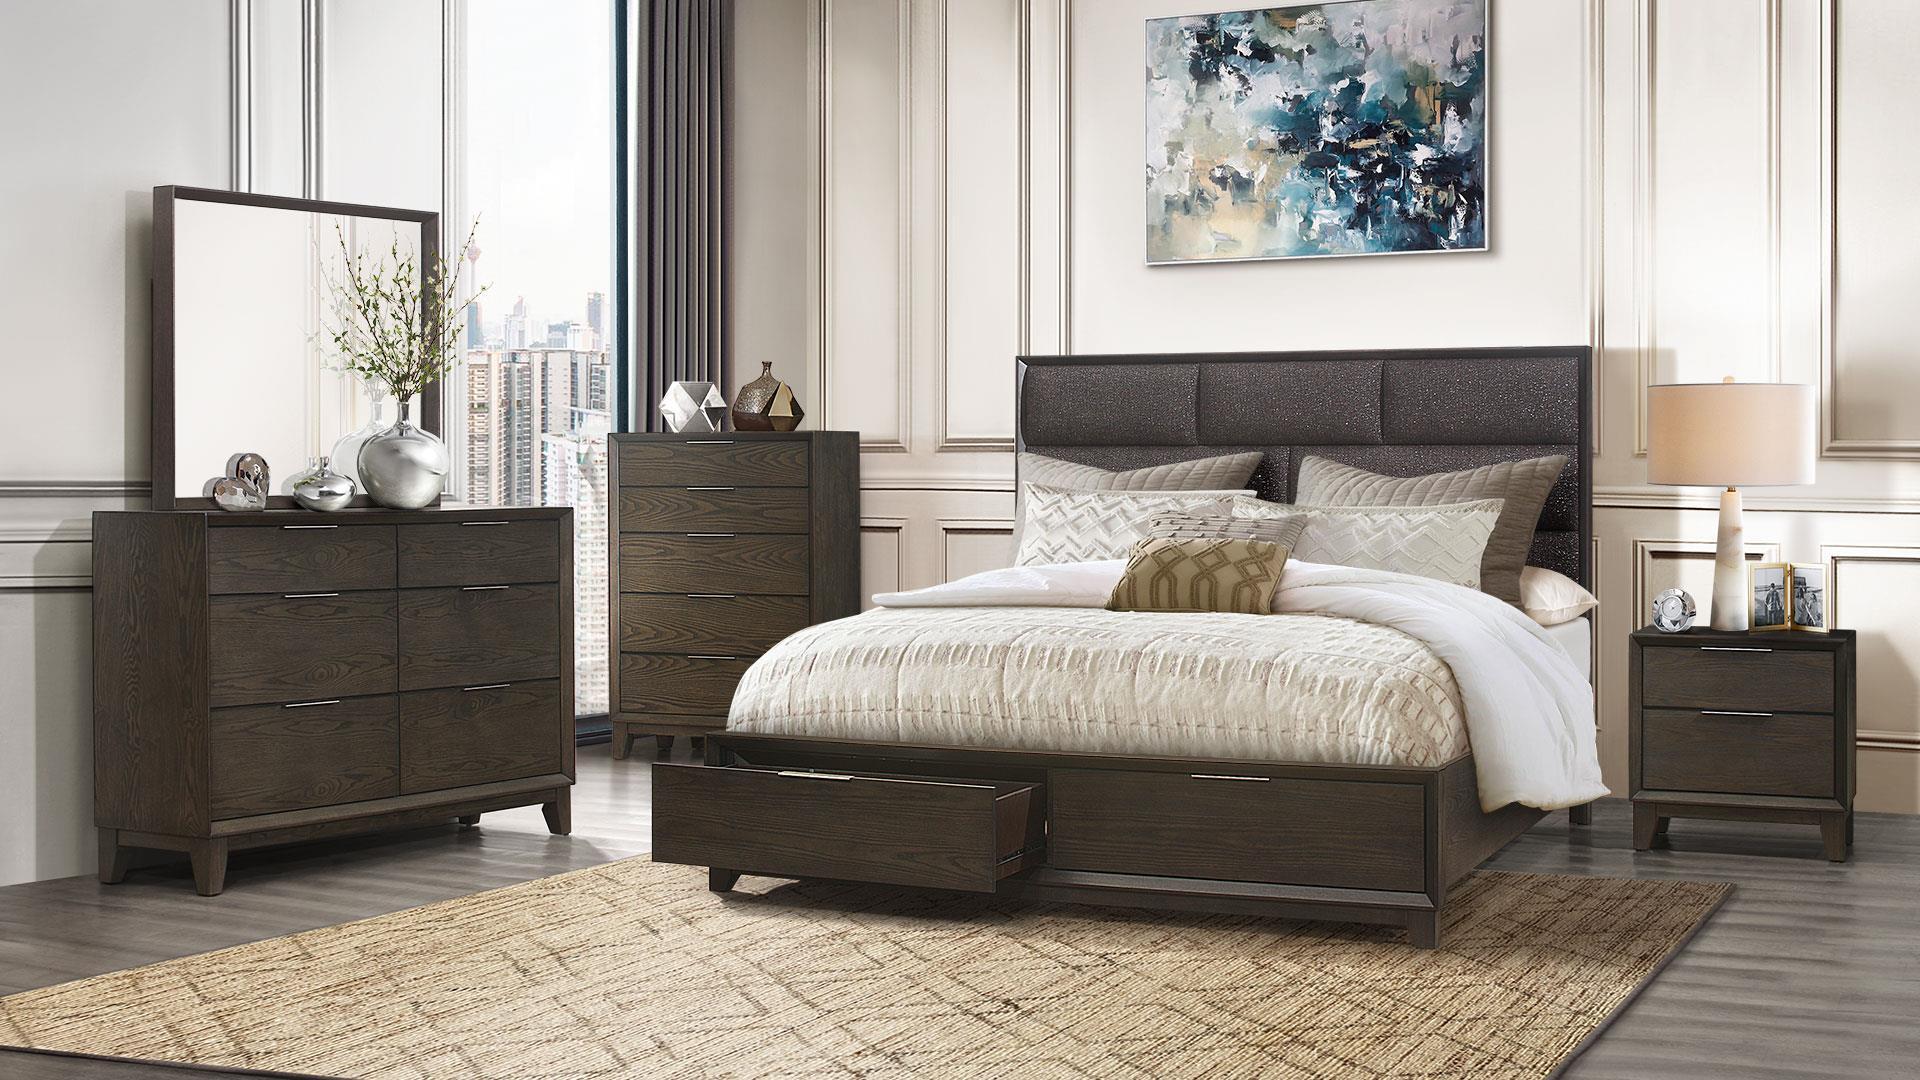 Contemporary Platform Bedroom Set WILLOW WILLOW-QB-Set-5 in Gray, Chocolate Fabric